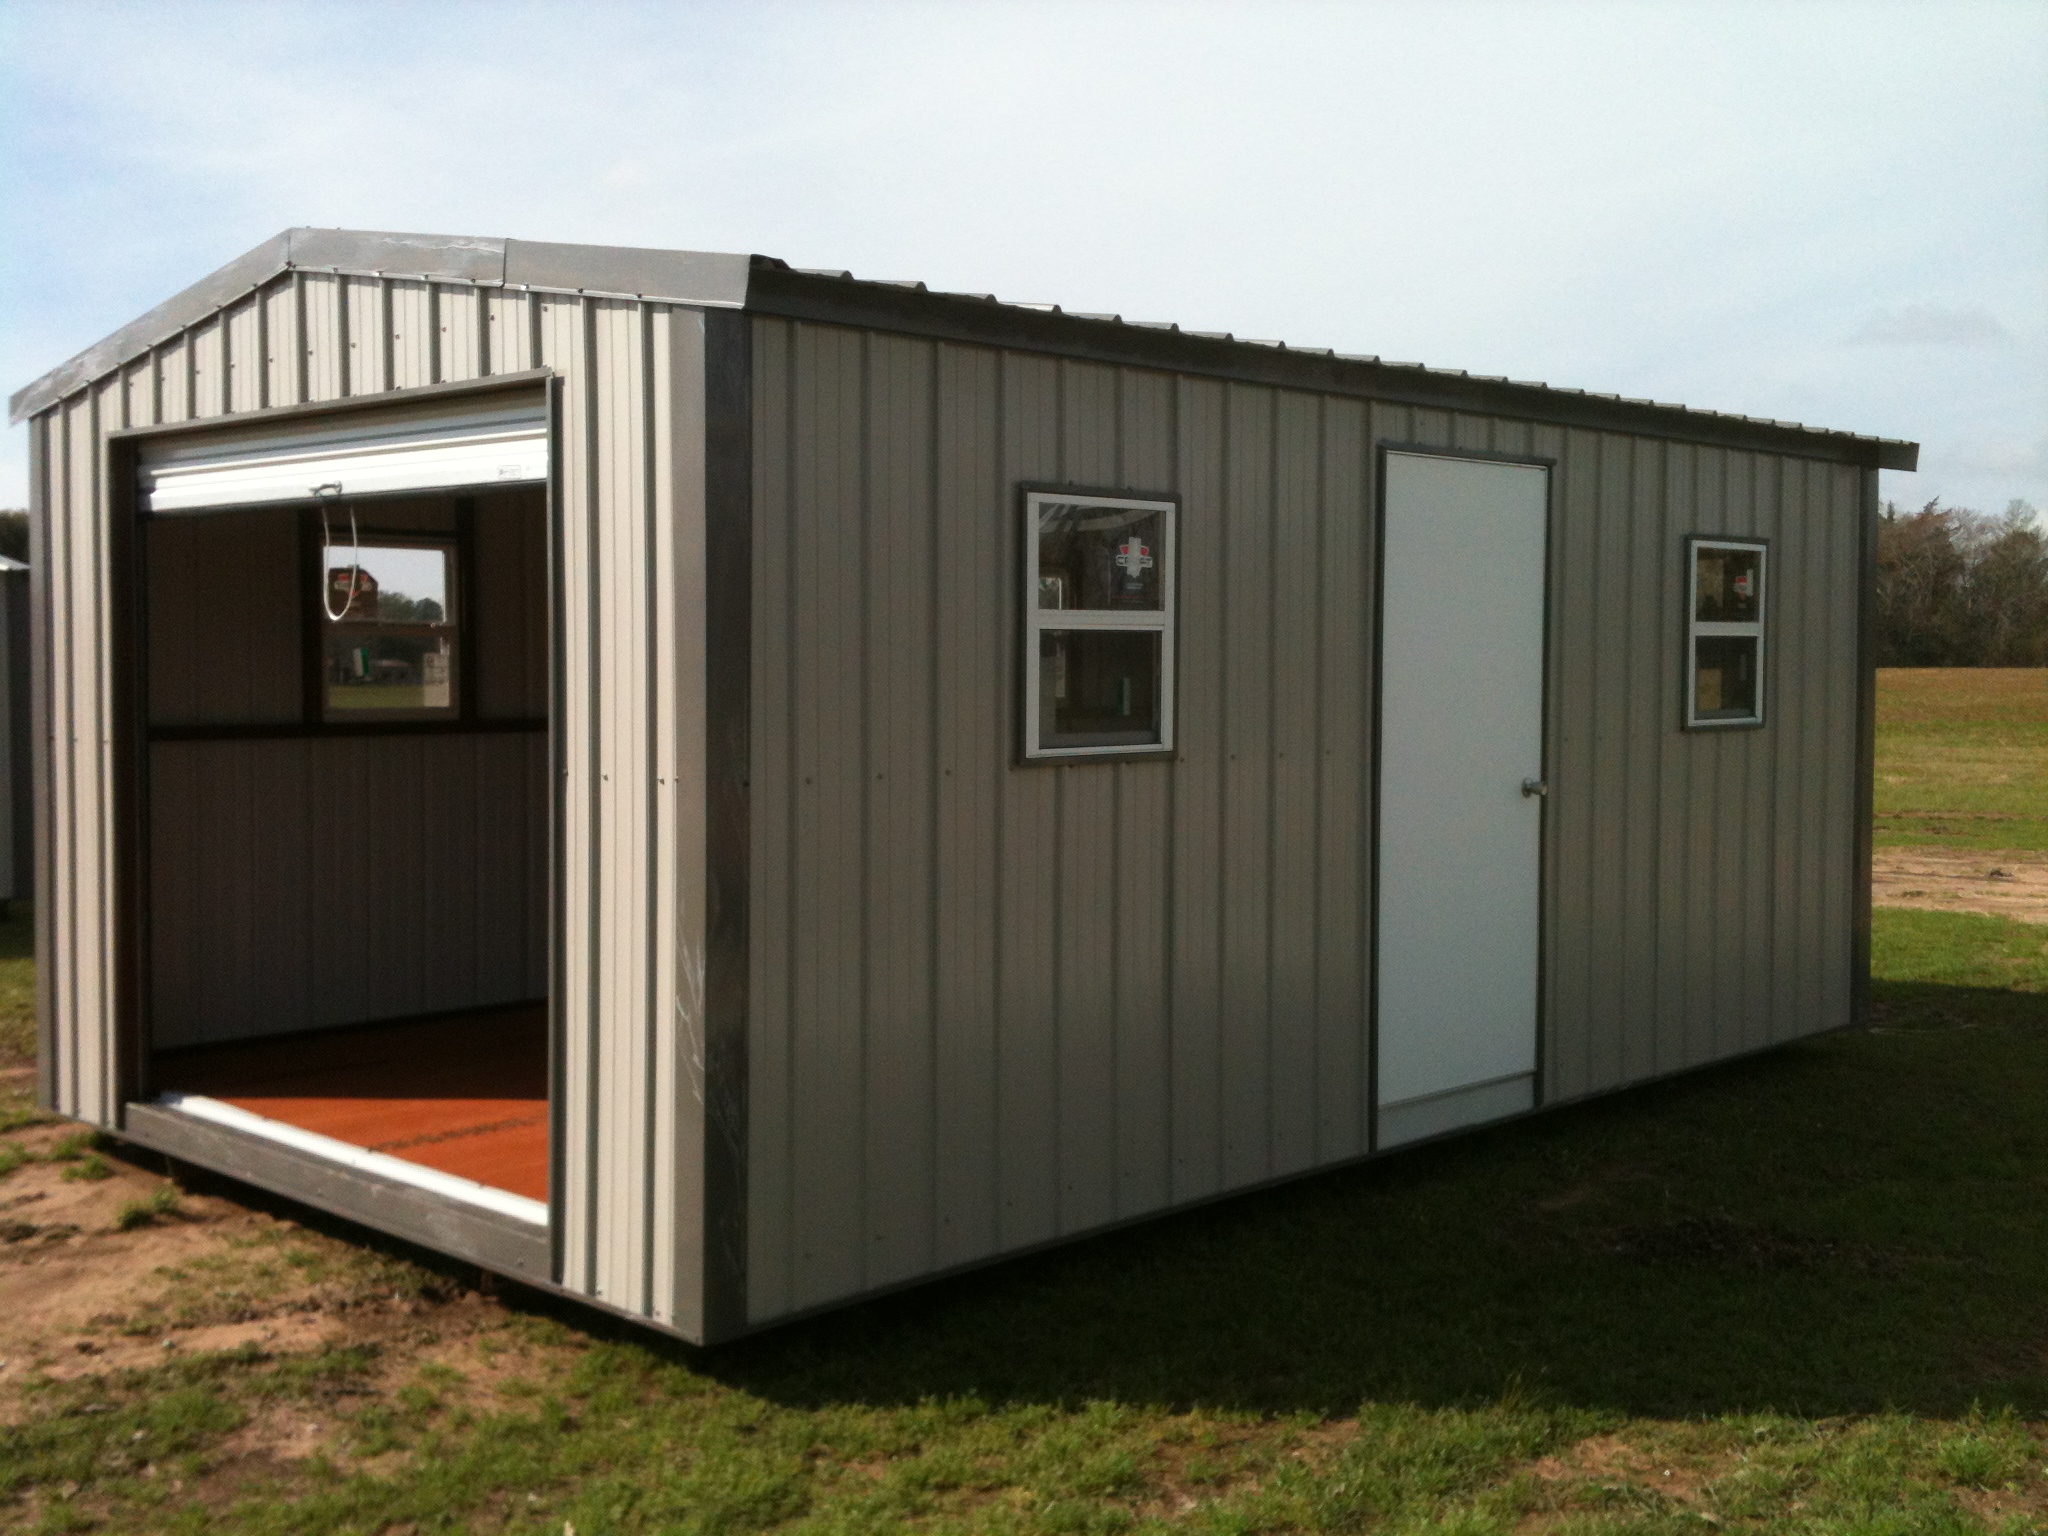 Save time and money by owning portable buildings